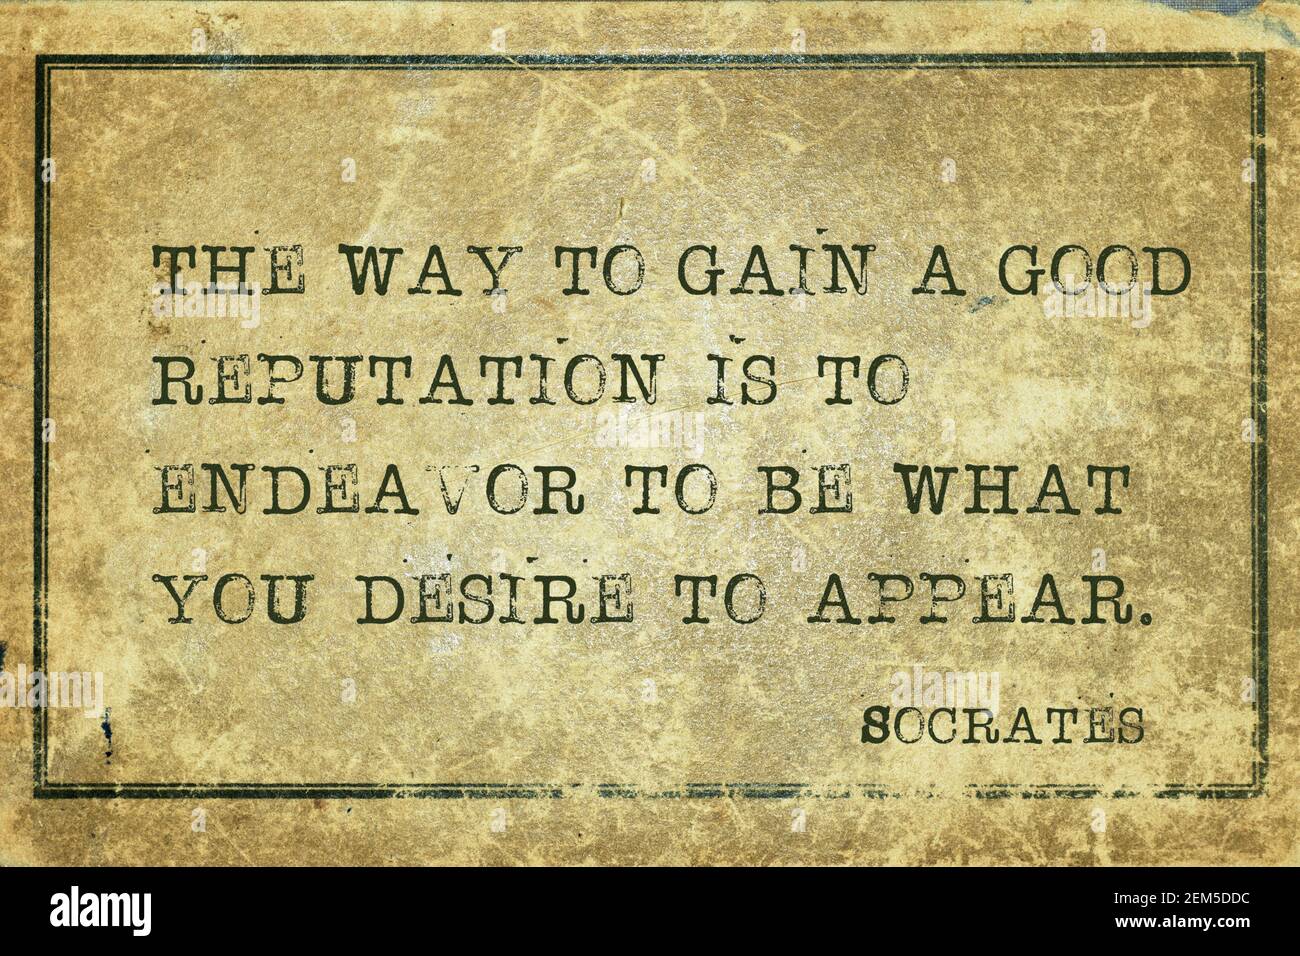 The way to gain a good reputation is to endeavor to be what you desire to appear - ancient Greek philosopher Socrates quote printed on grunge vintage Stock Photo